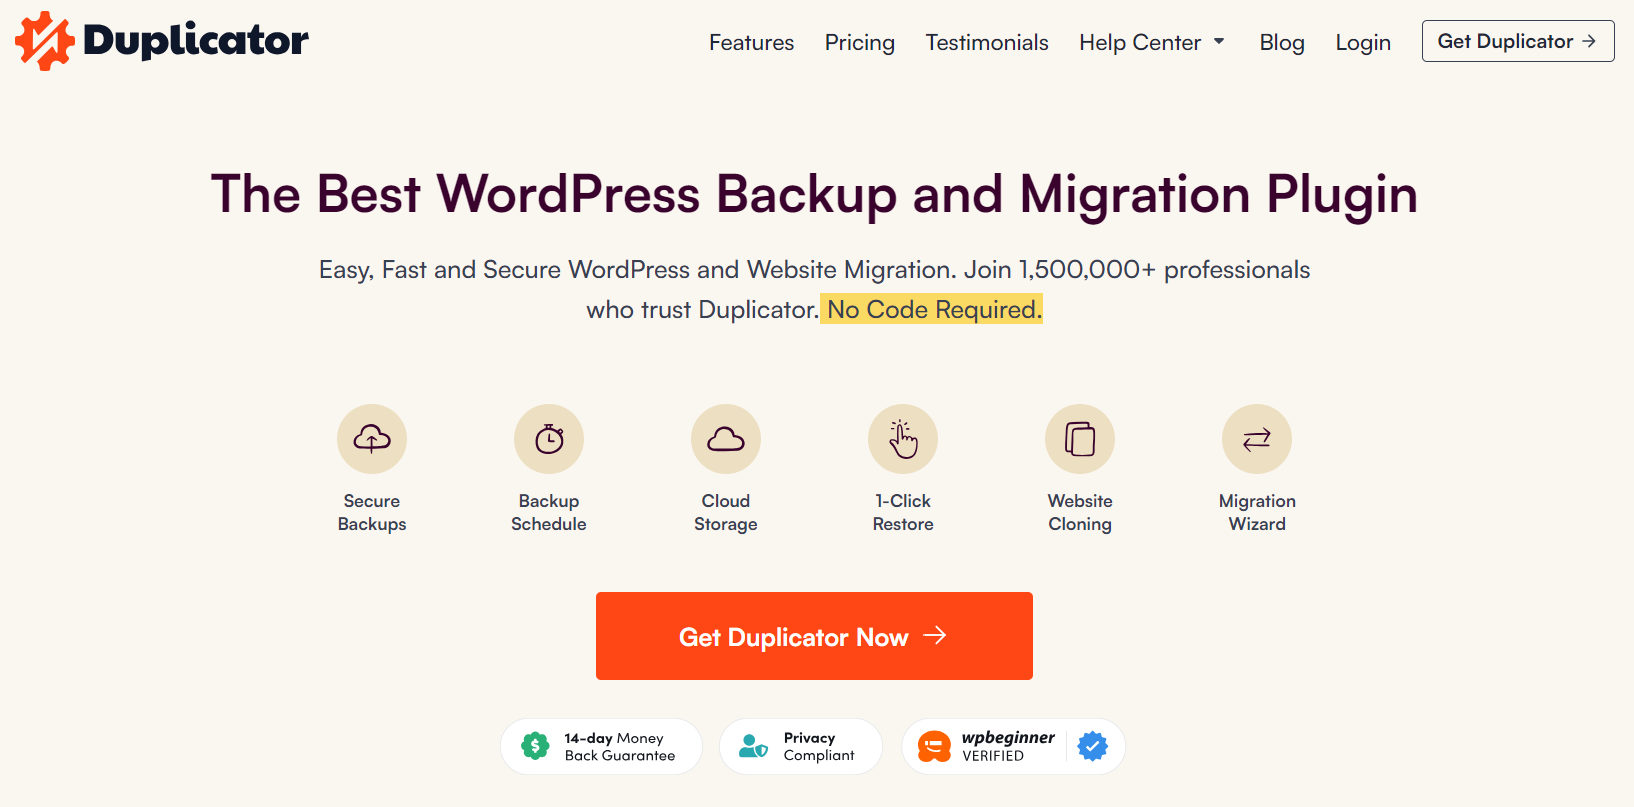 Download Duplicator is the best WordPress backup and migration plugin